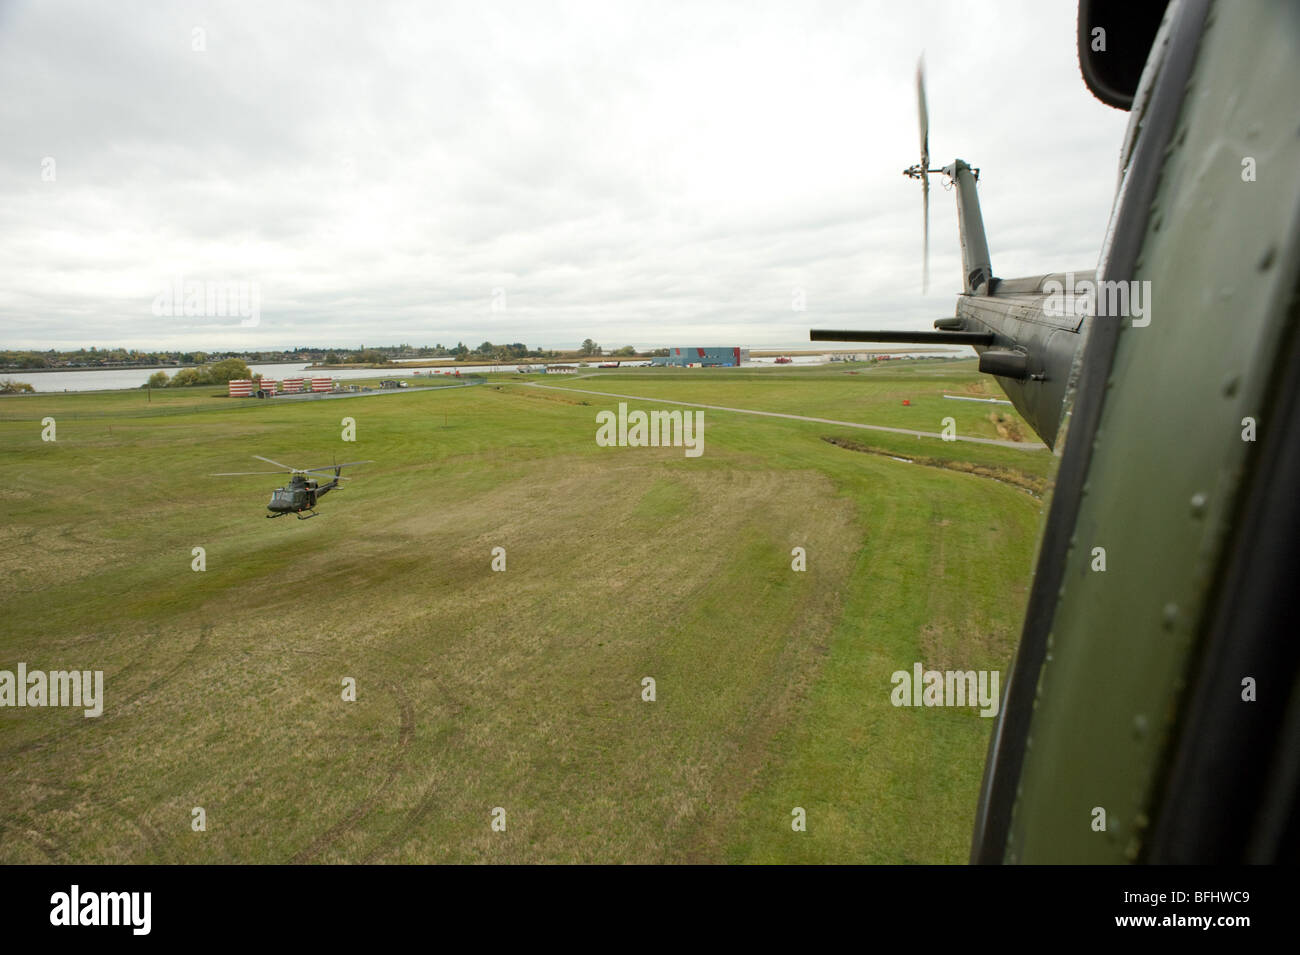 two military bell helicopters taking off from grass pad Stock Photo